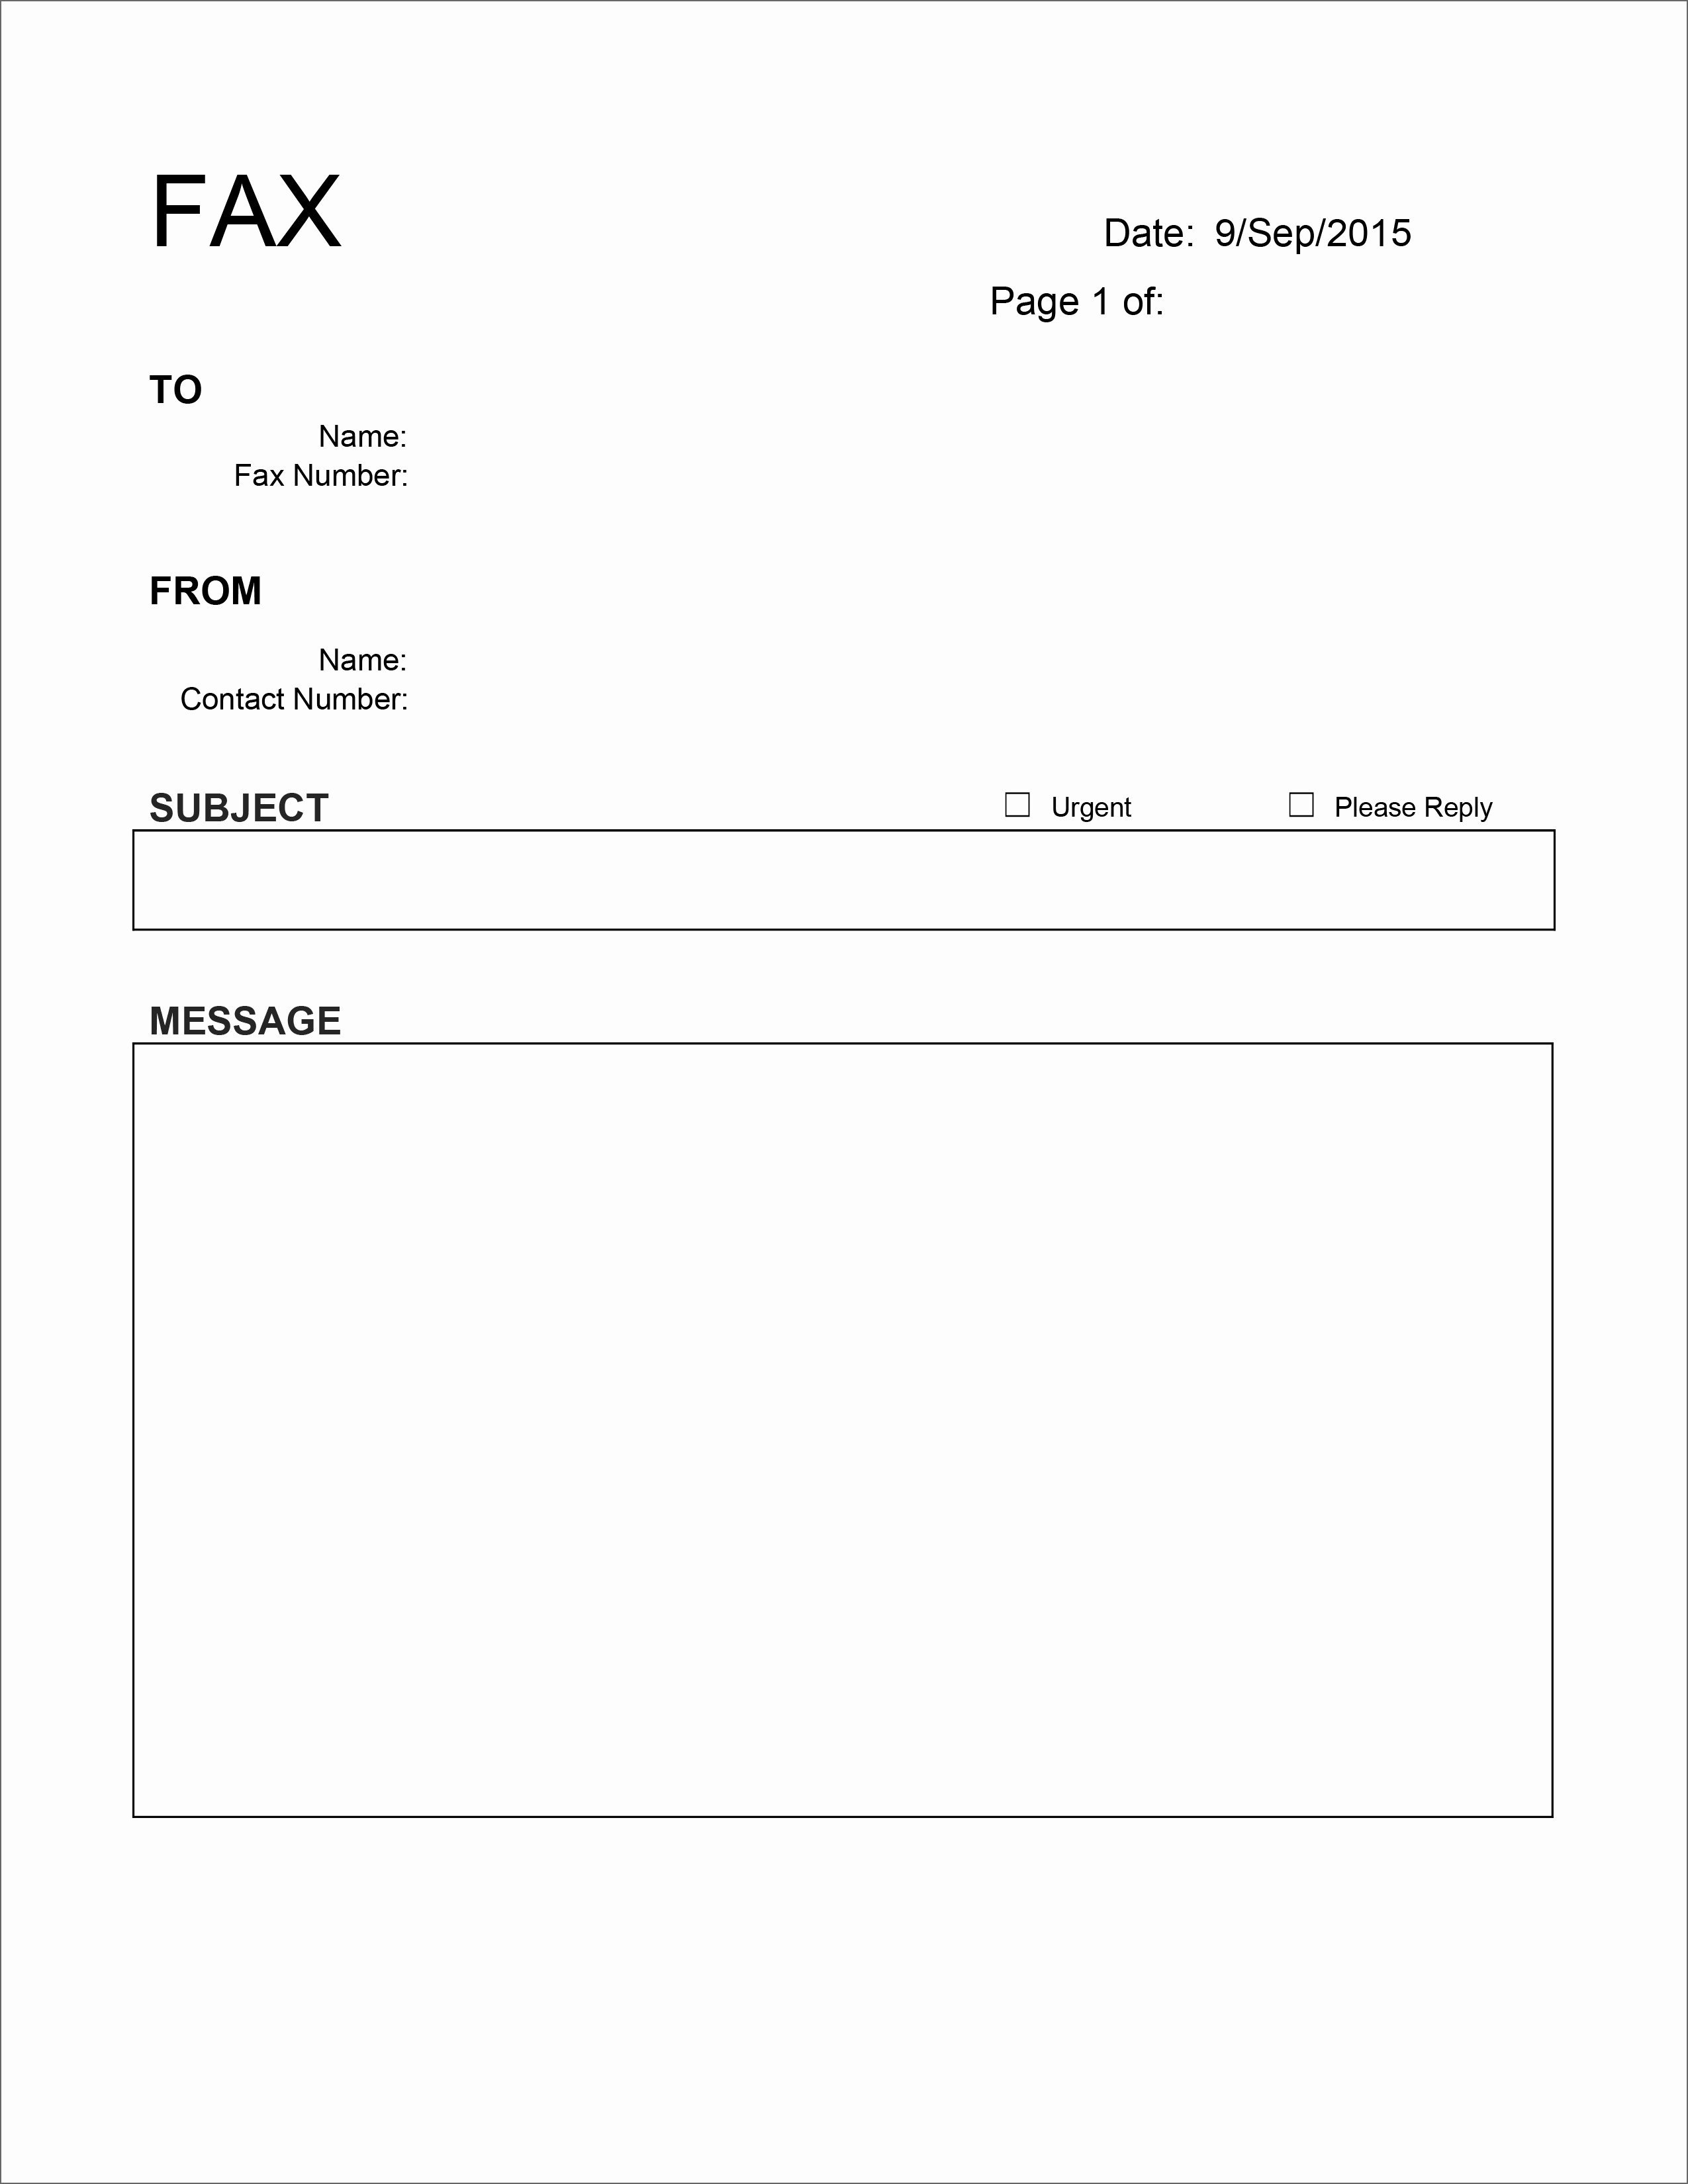 Fax Cover Sheet Template Free Awesome 20 Free Fax Cover Templates Sheets In Microsoft Fice Docx